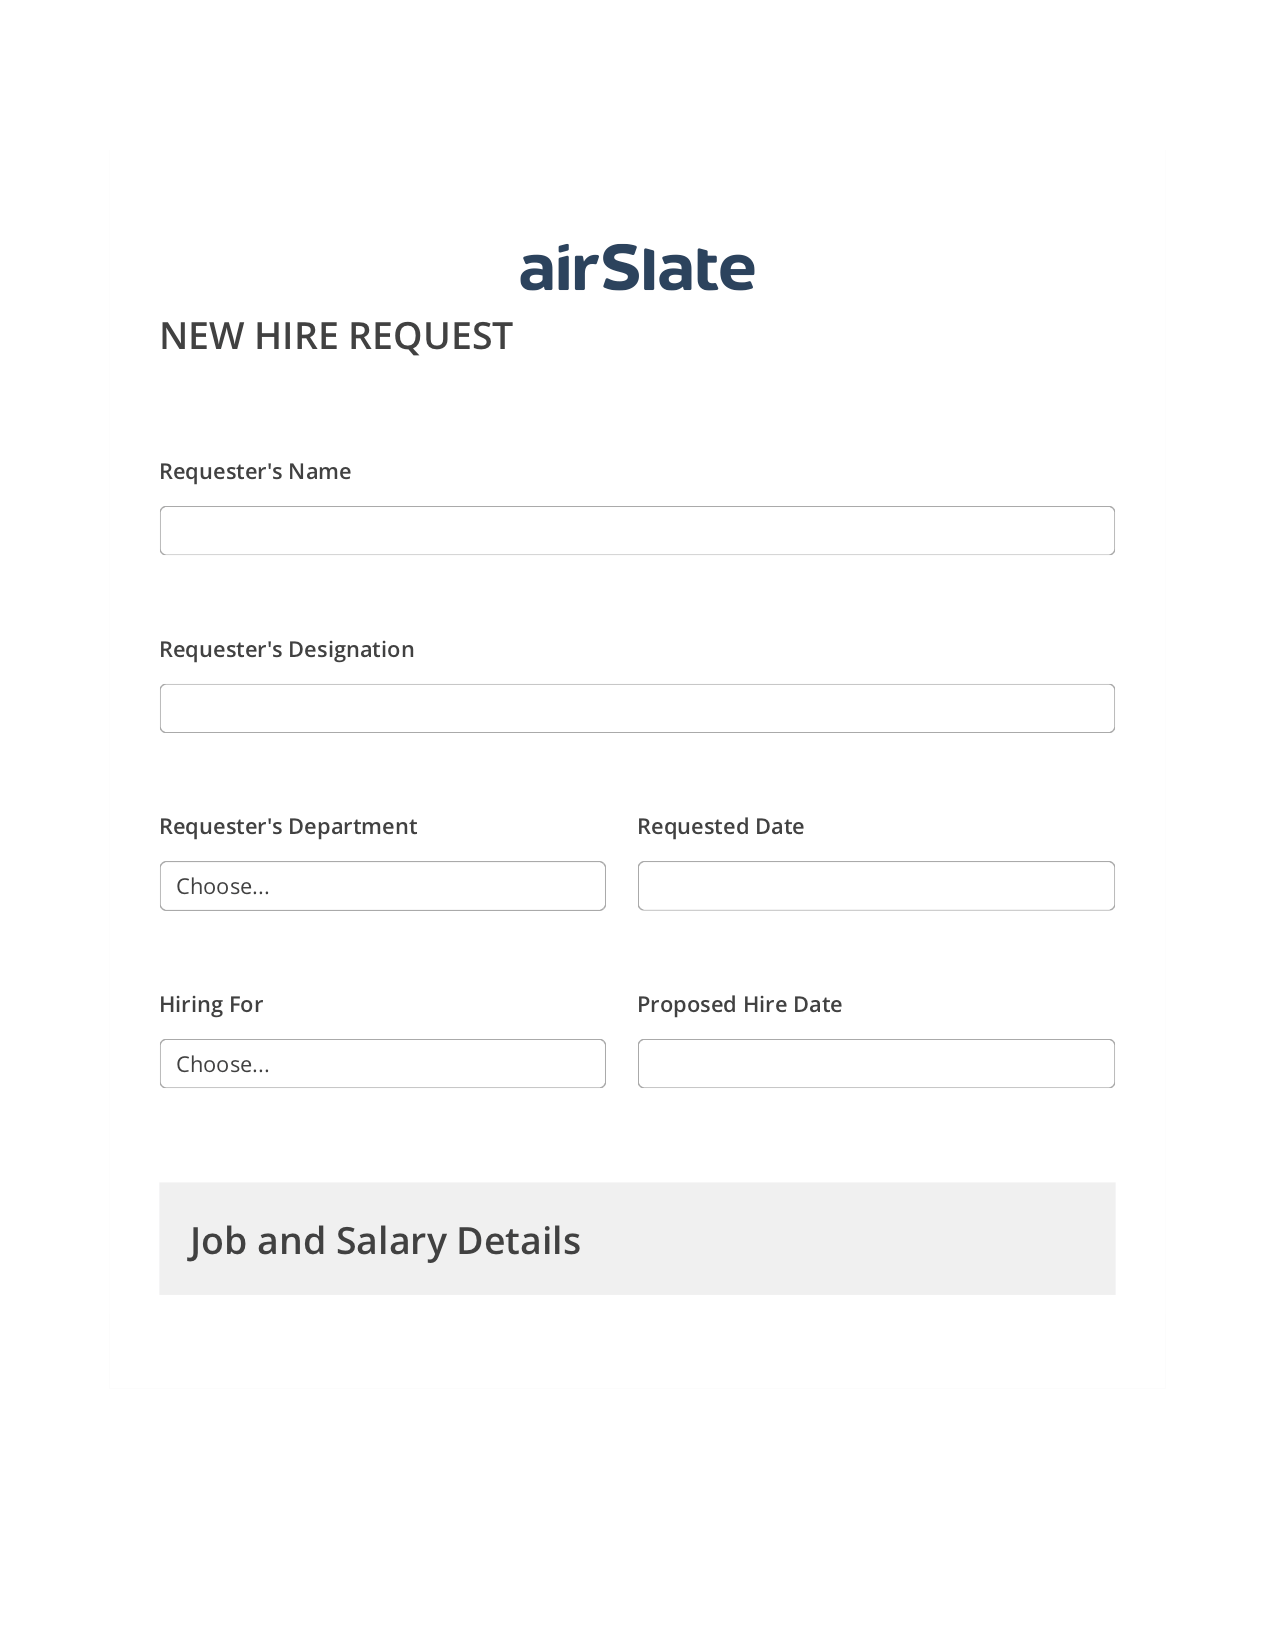 Multirole Hiring Request Workflow Pre-fill from Excel Spreadsheet Bot, Create slate from another Flow Bot, Archive to SharePoint Folder Bot